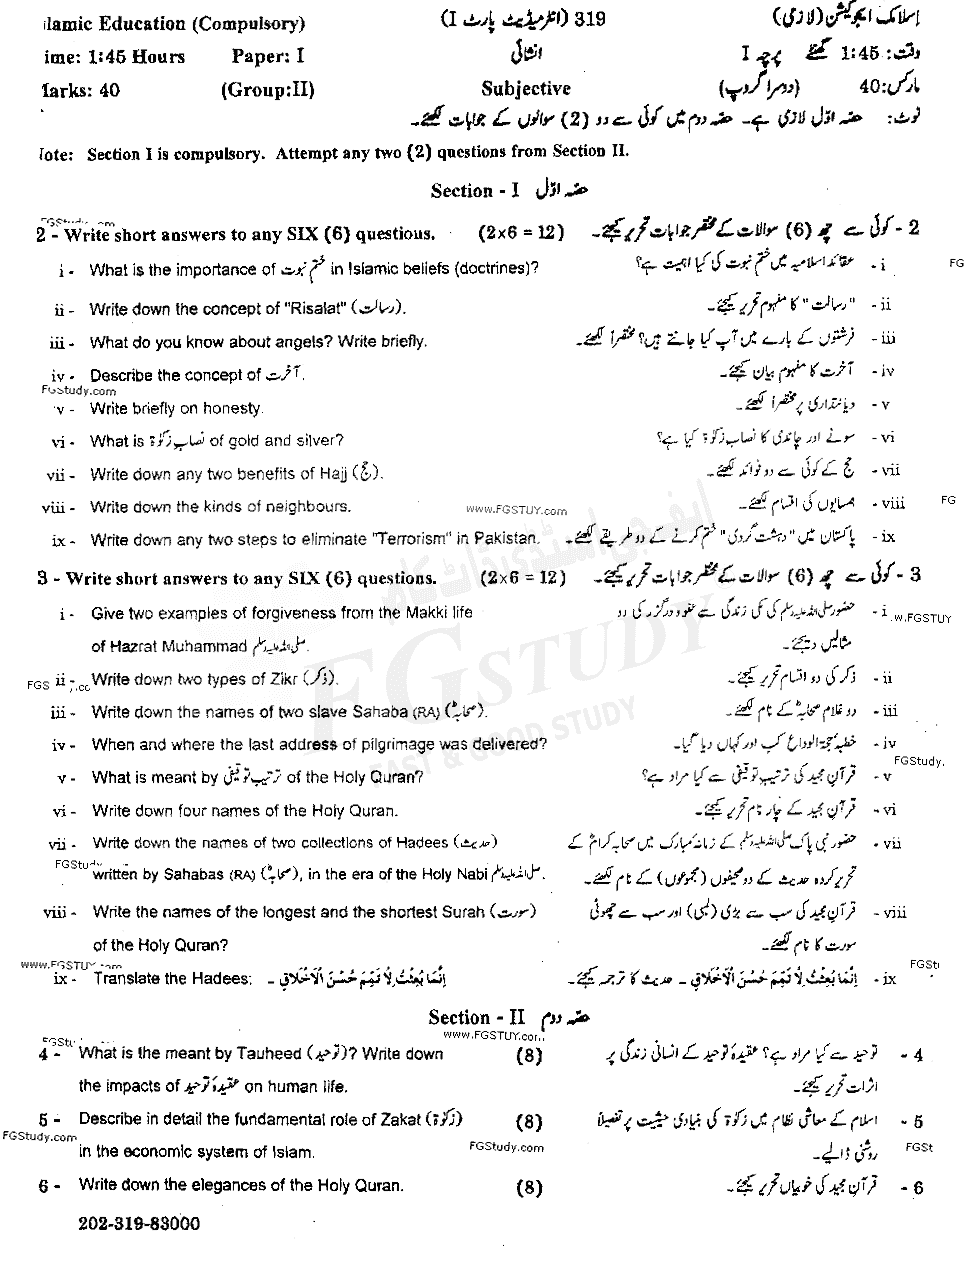 11th Class Islamic Education Past Paper 2019 Gujranwala Board Group 2 Subjective